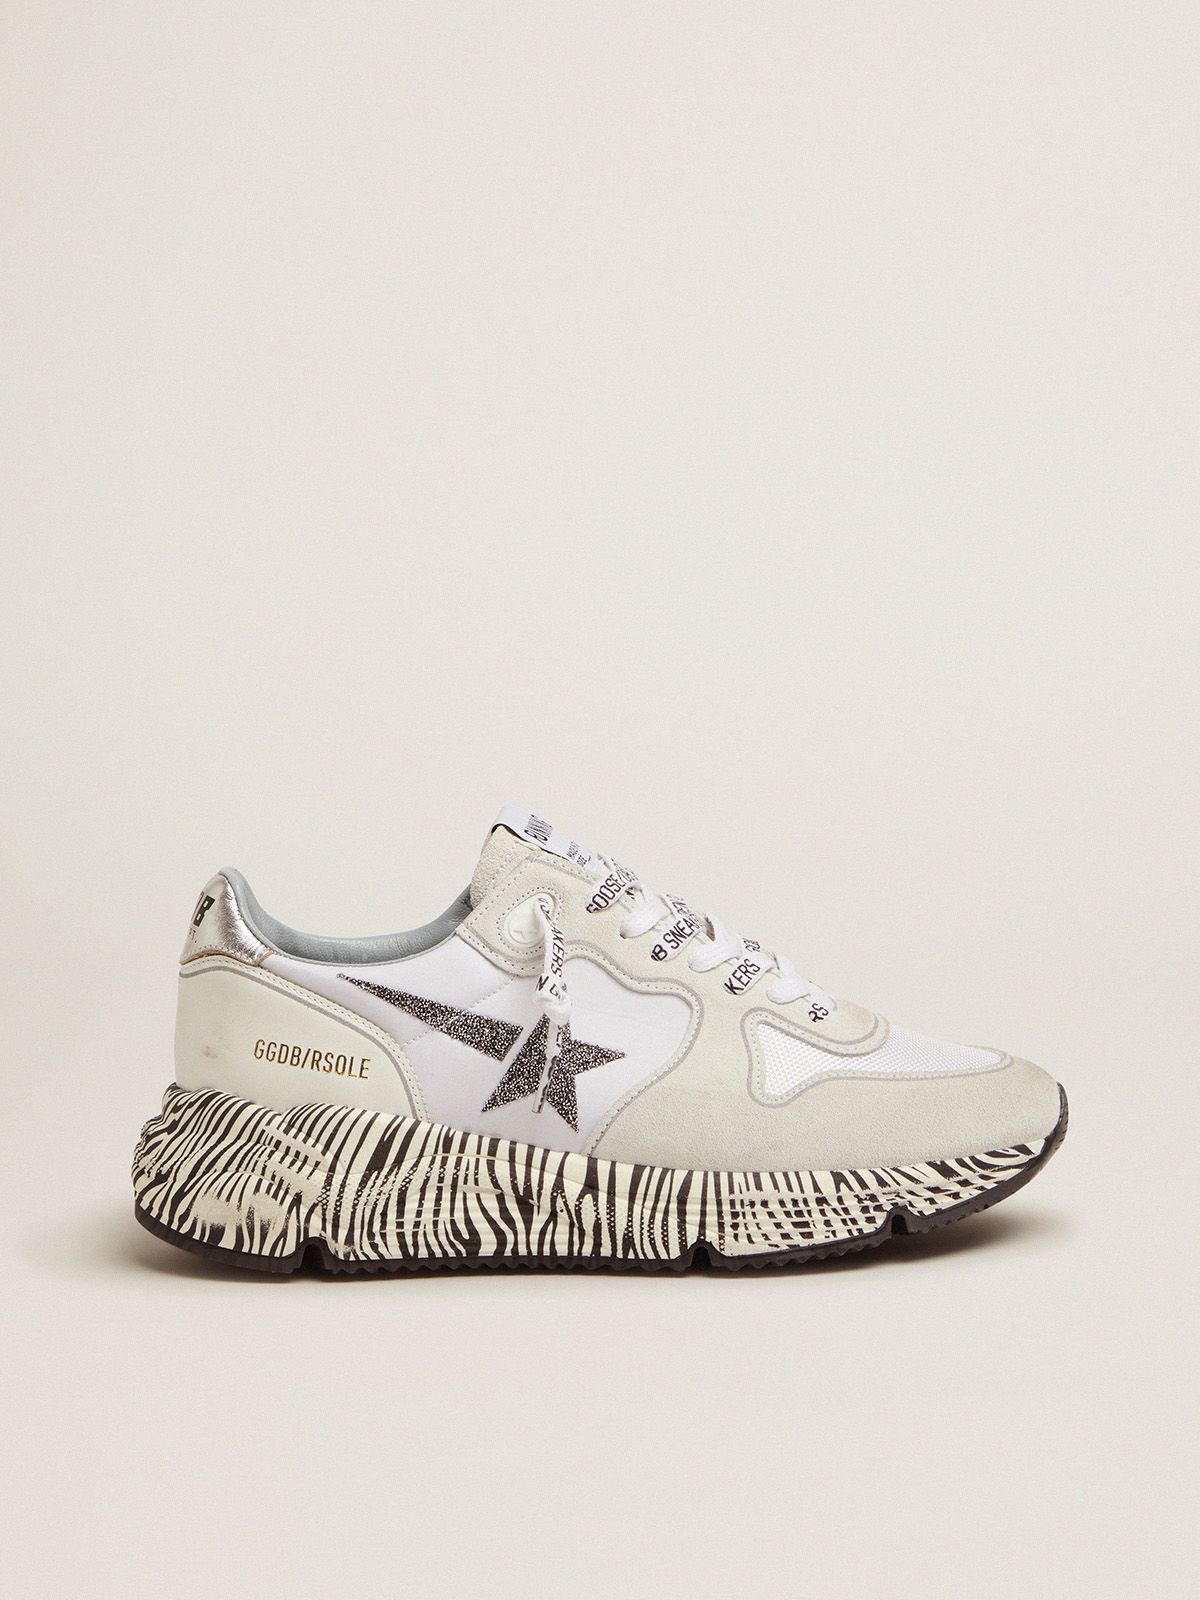 Running Sole sneakers with zebra-print sole and crystals